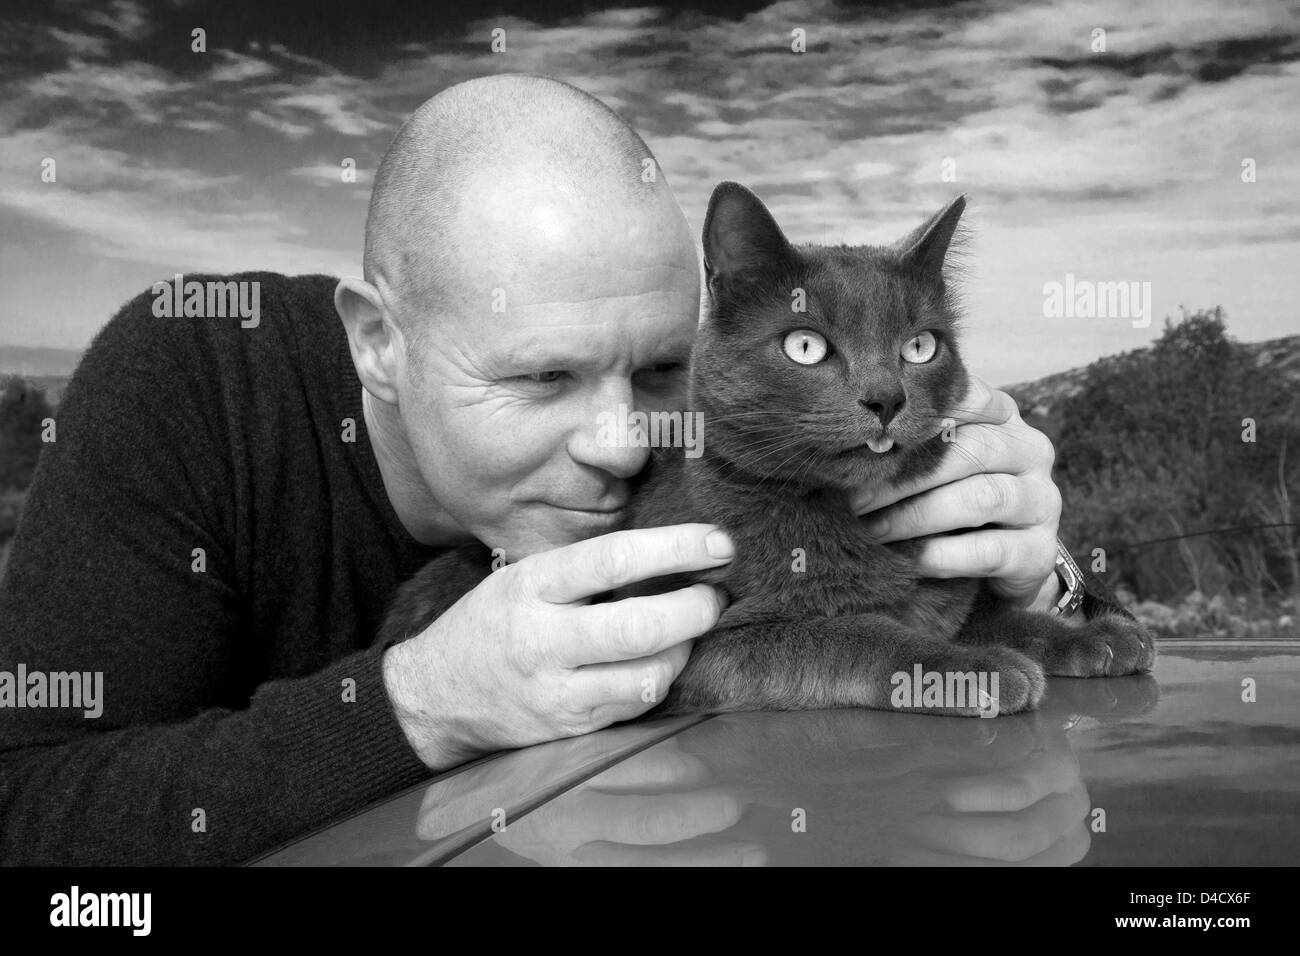 Man and cat Stock Photo